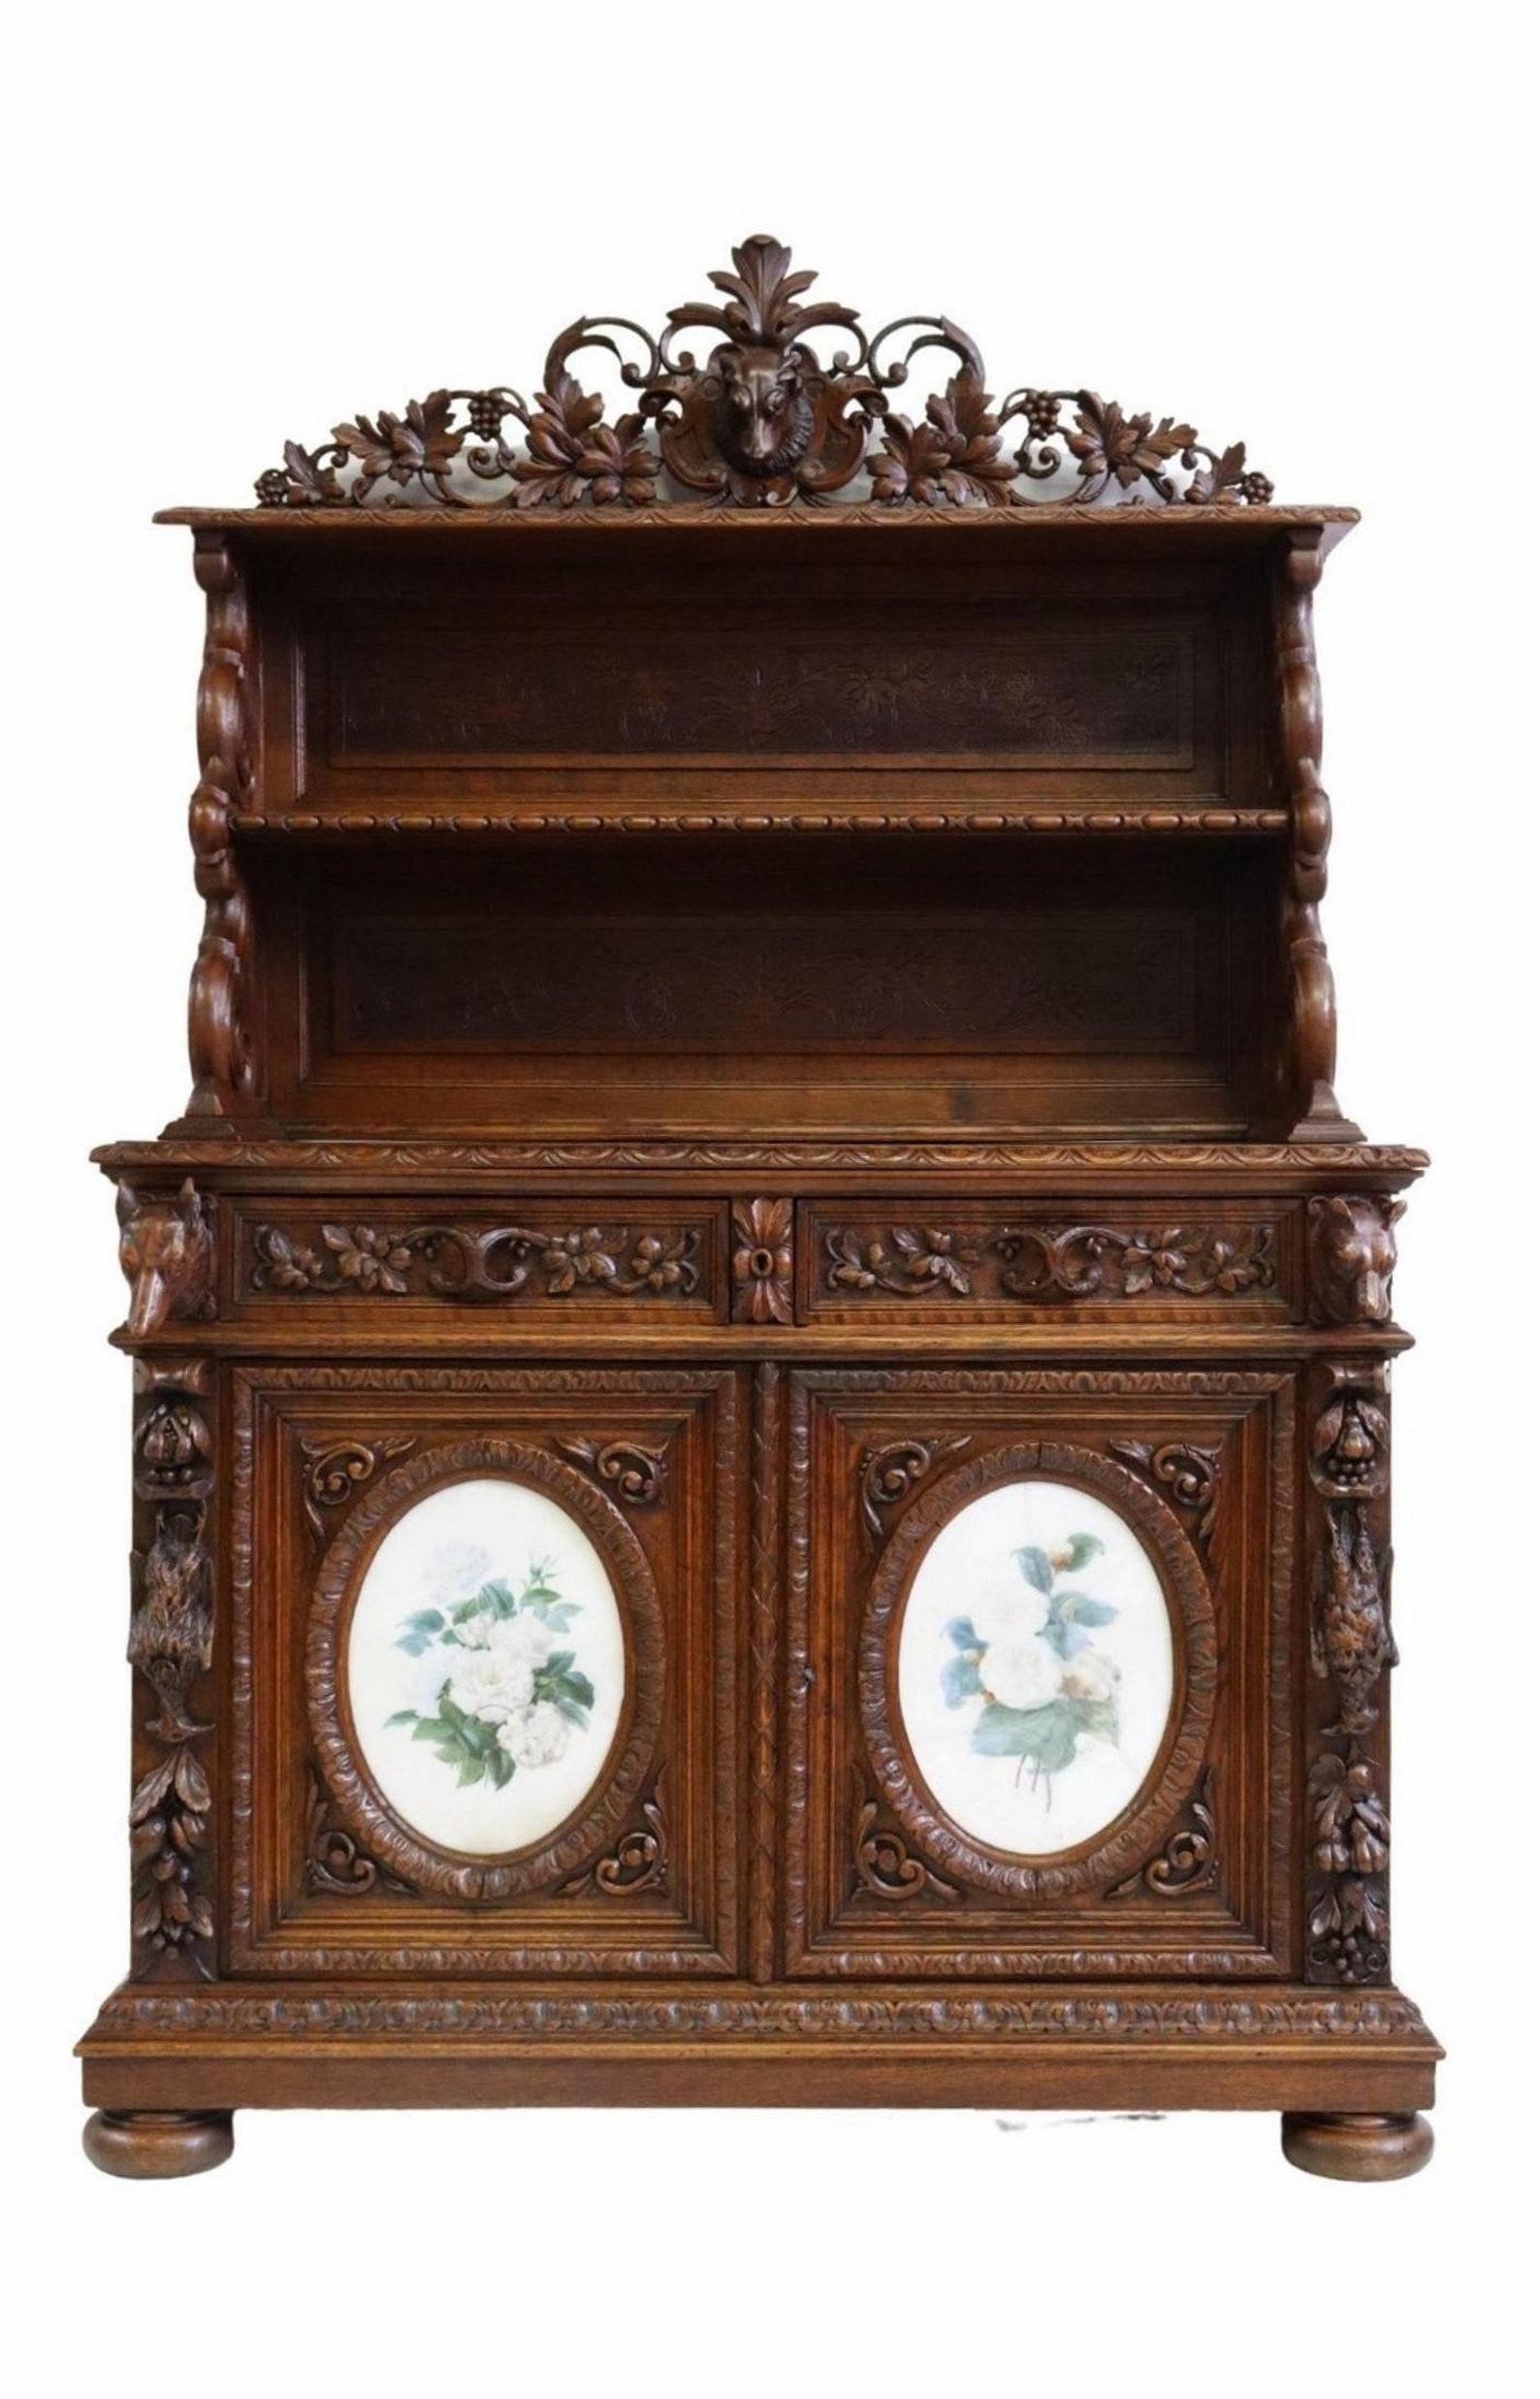 19th Century French Renaissance Revival Signed Hunt Cabinet For Sale 2